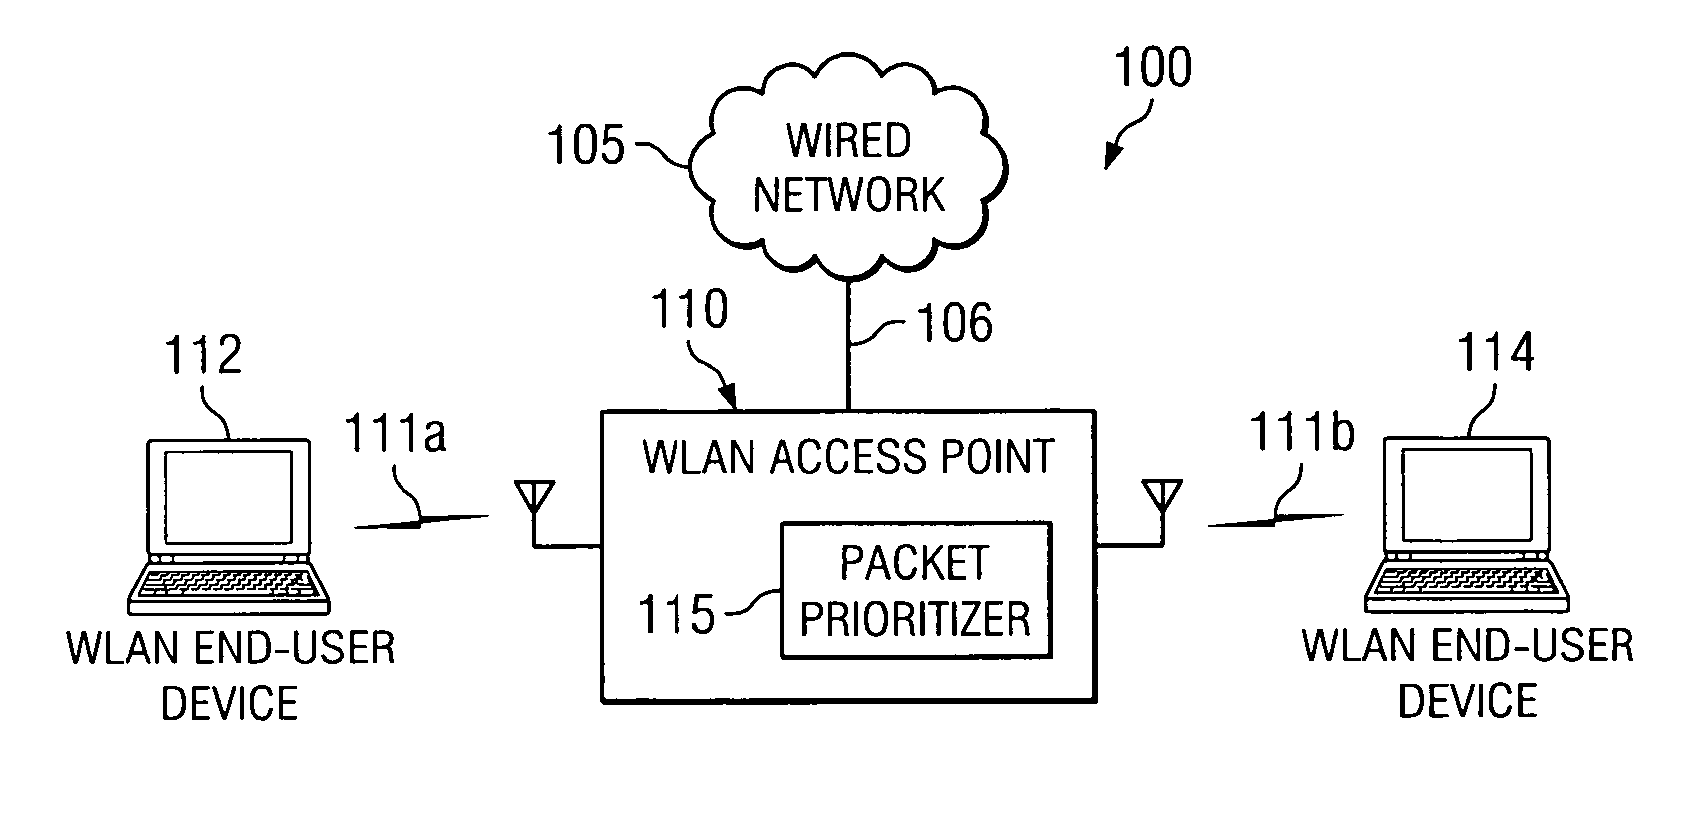 Packet-level service differentiation for quality of service provisioning over wireless local area networks